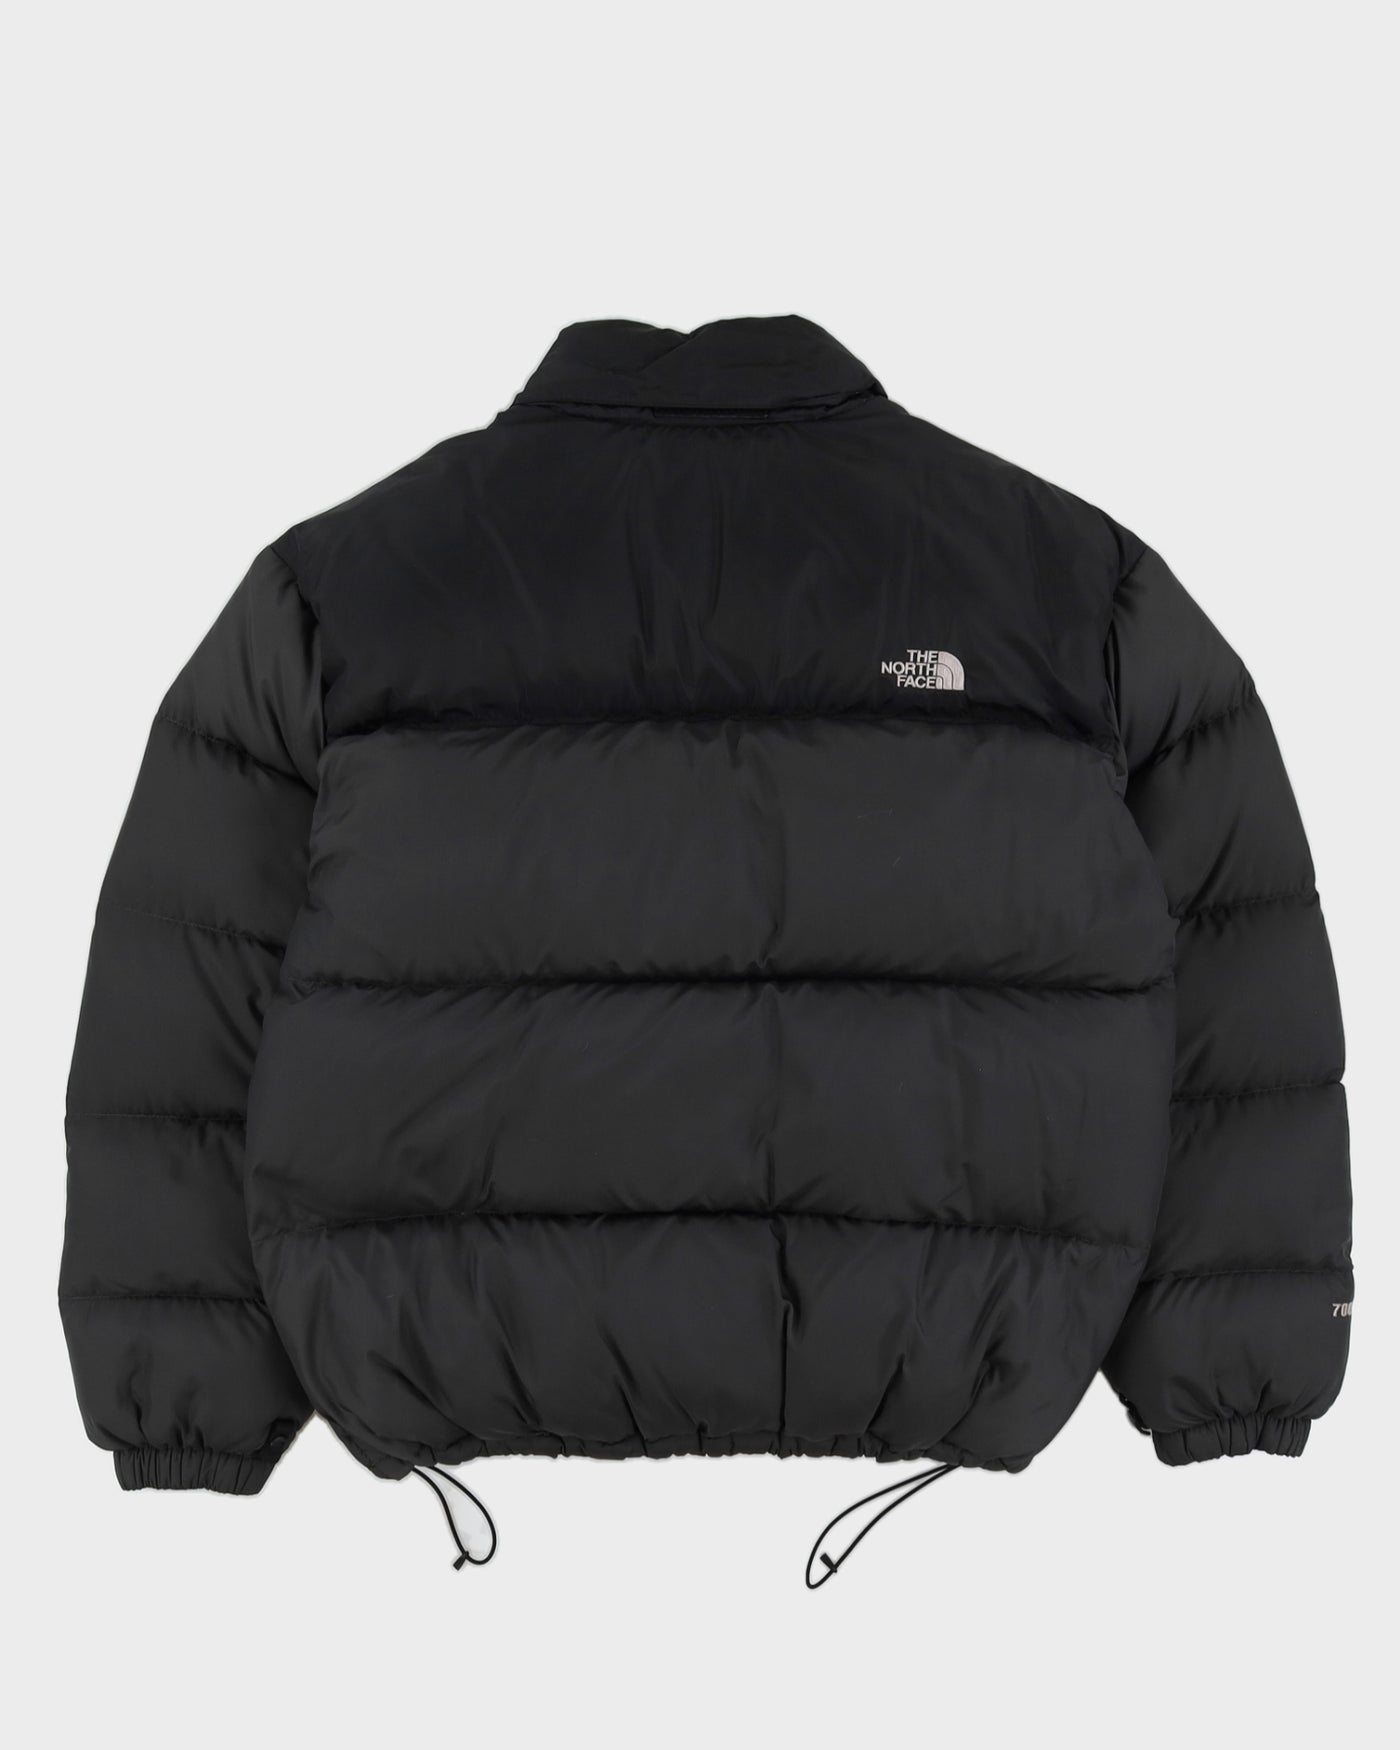 The North Face 700 Black Puffer Jacket - XL